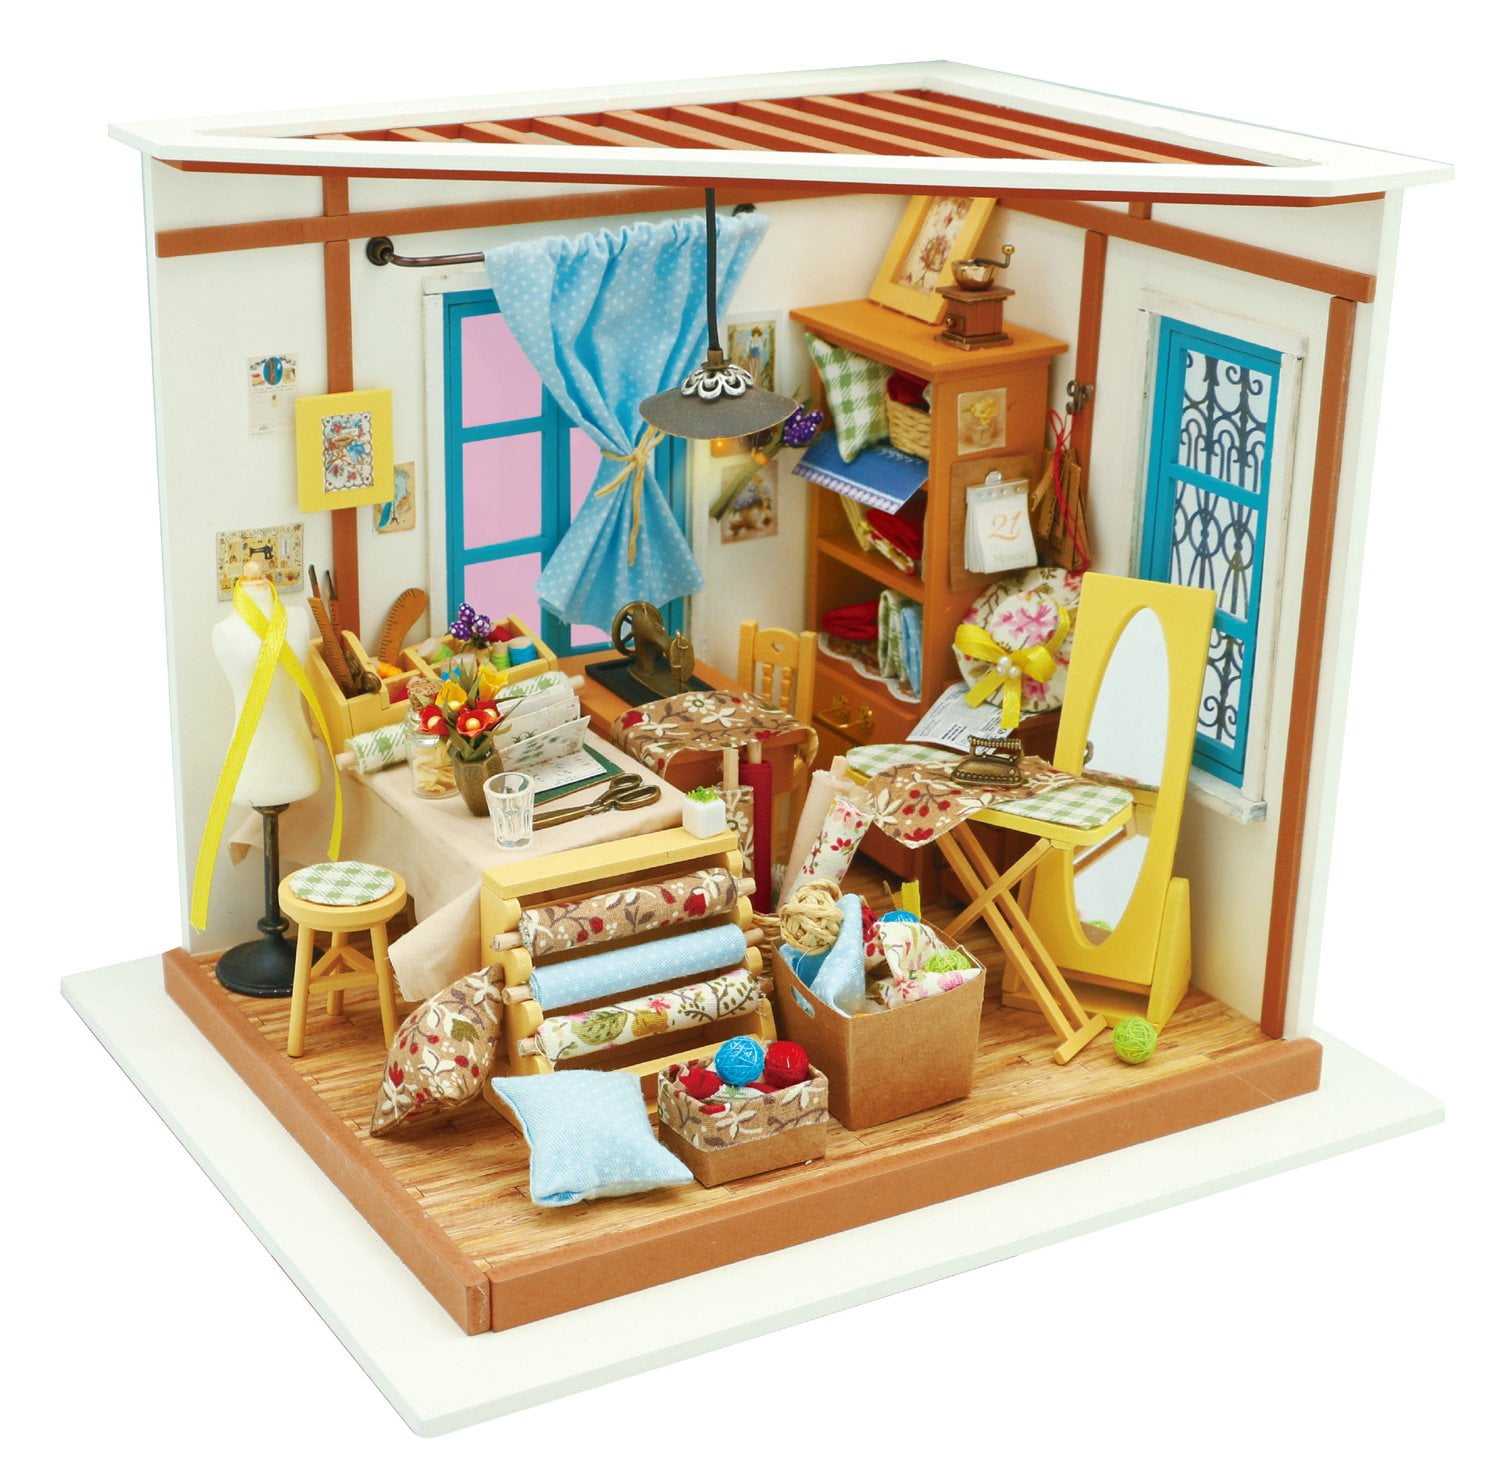 Miniature House Kit Diy Making Building Model Toys By Hand With